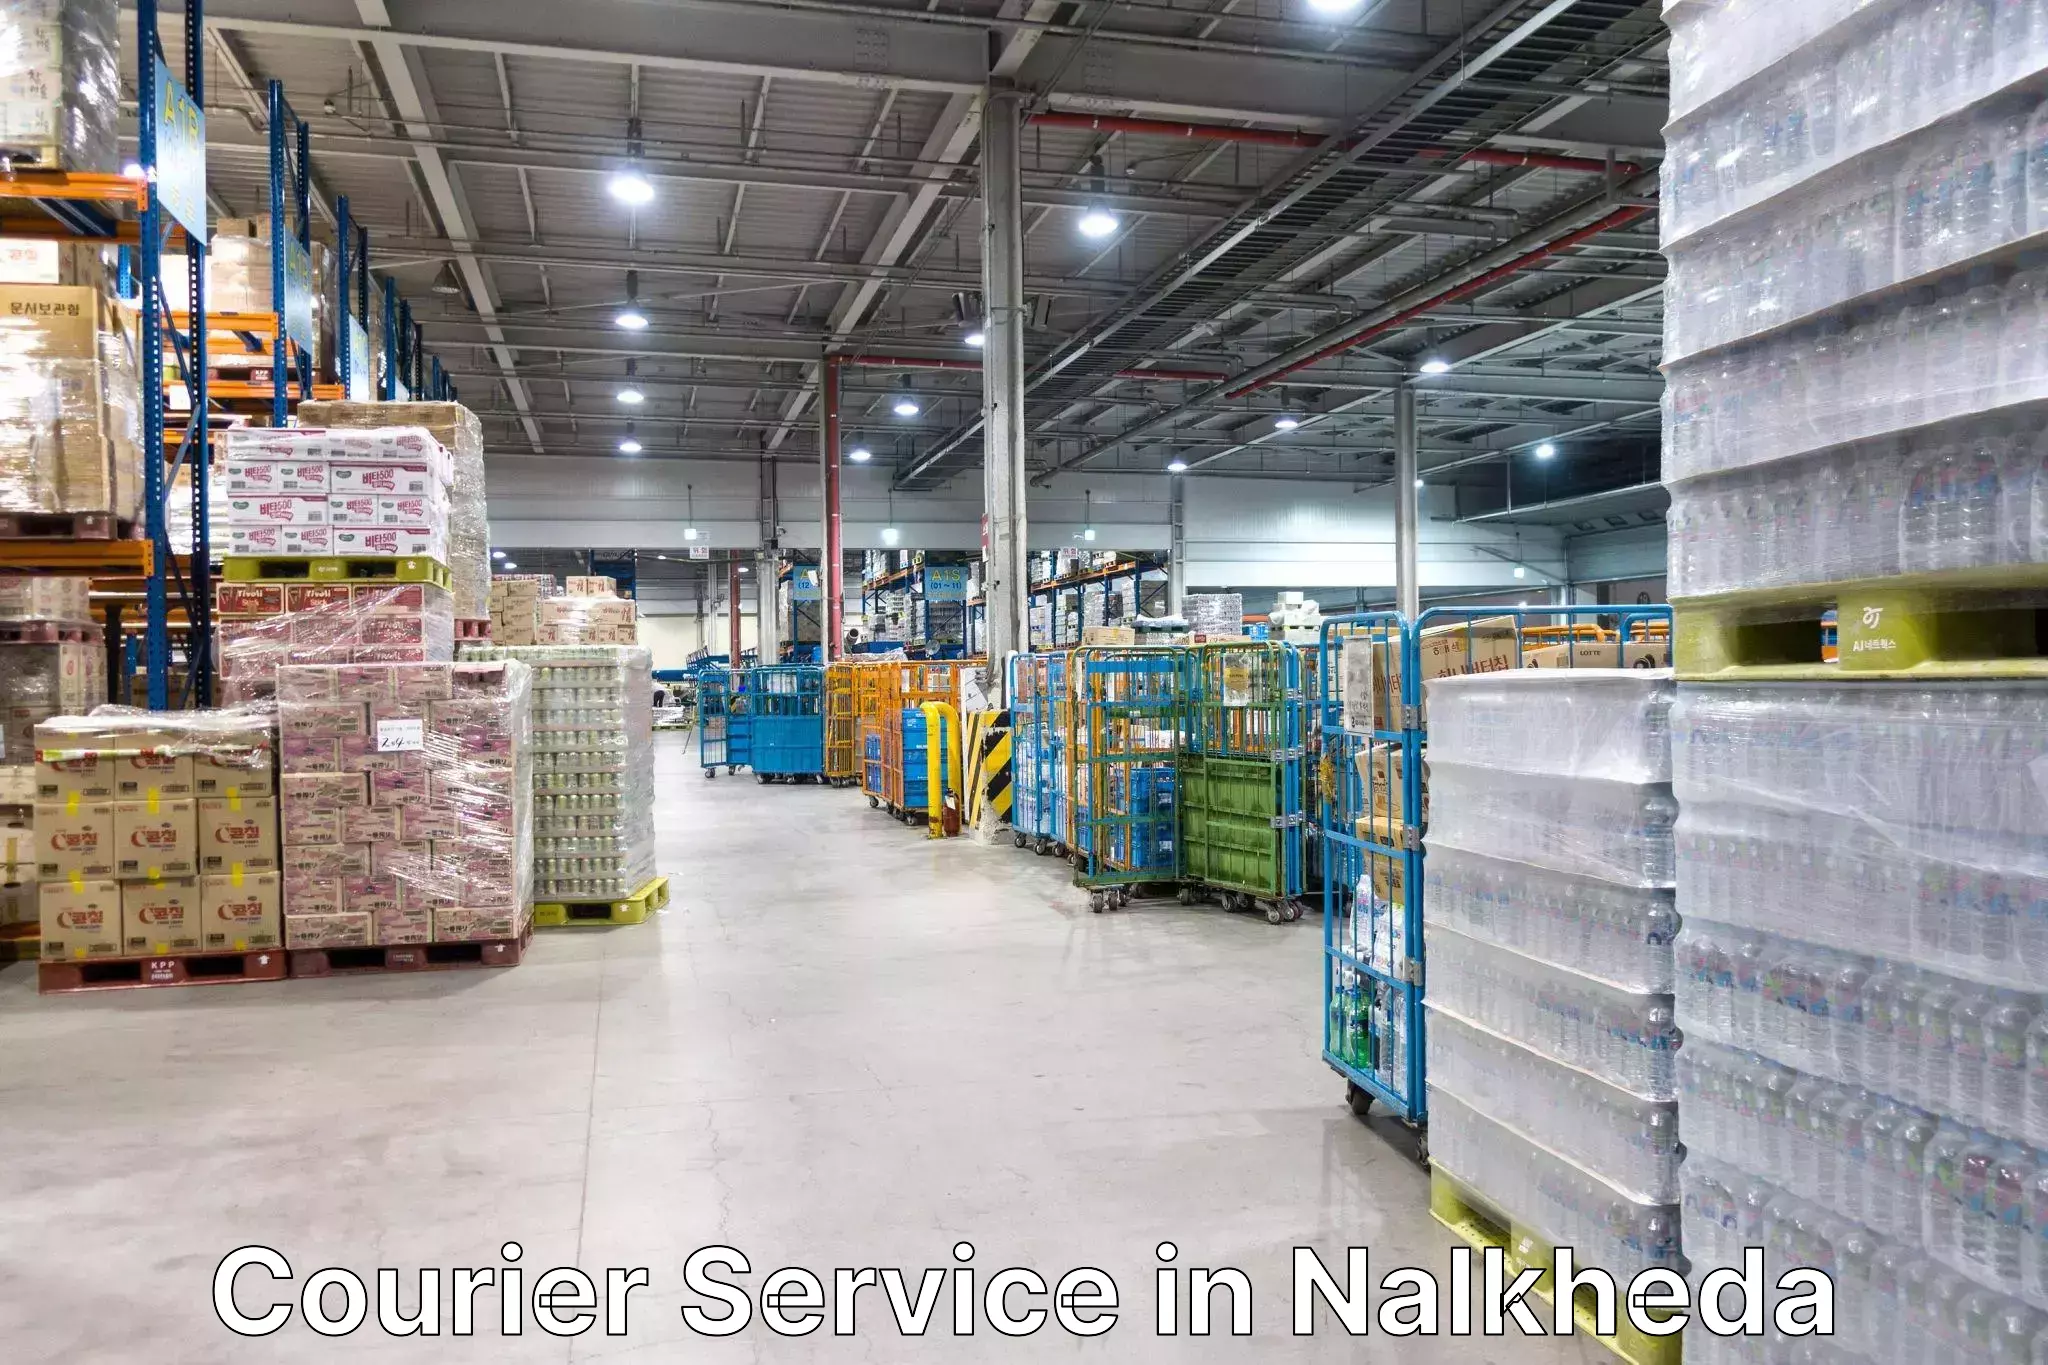 Efficient shipping operations in Nalkheda